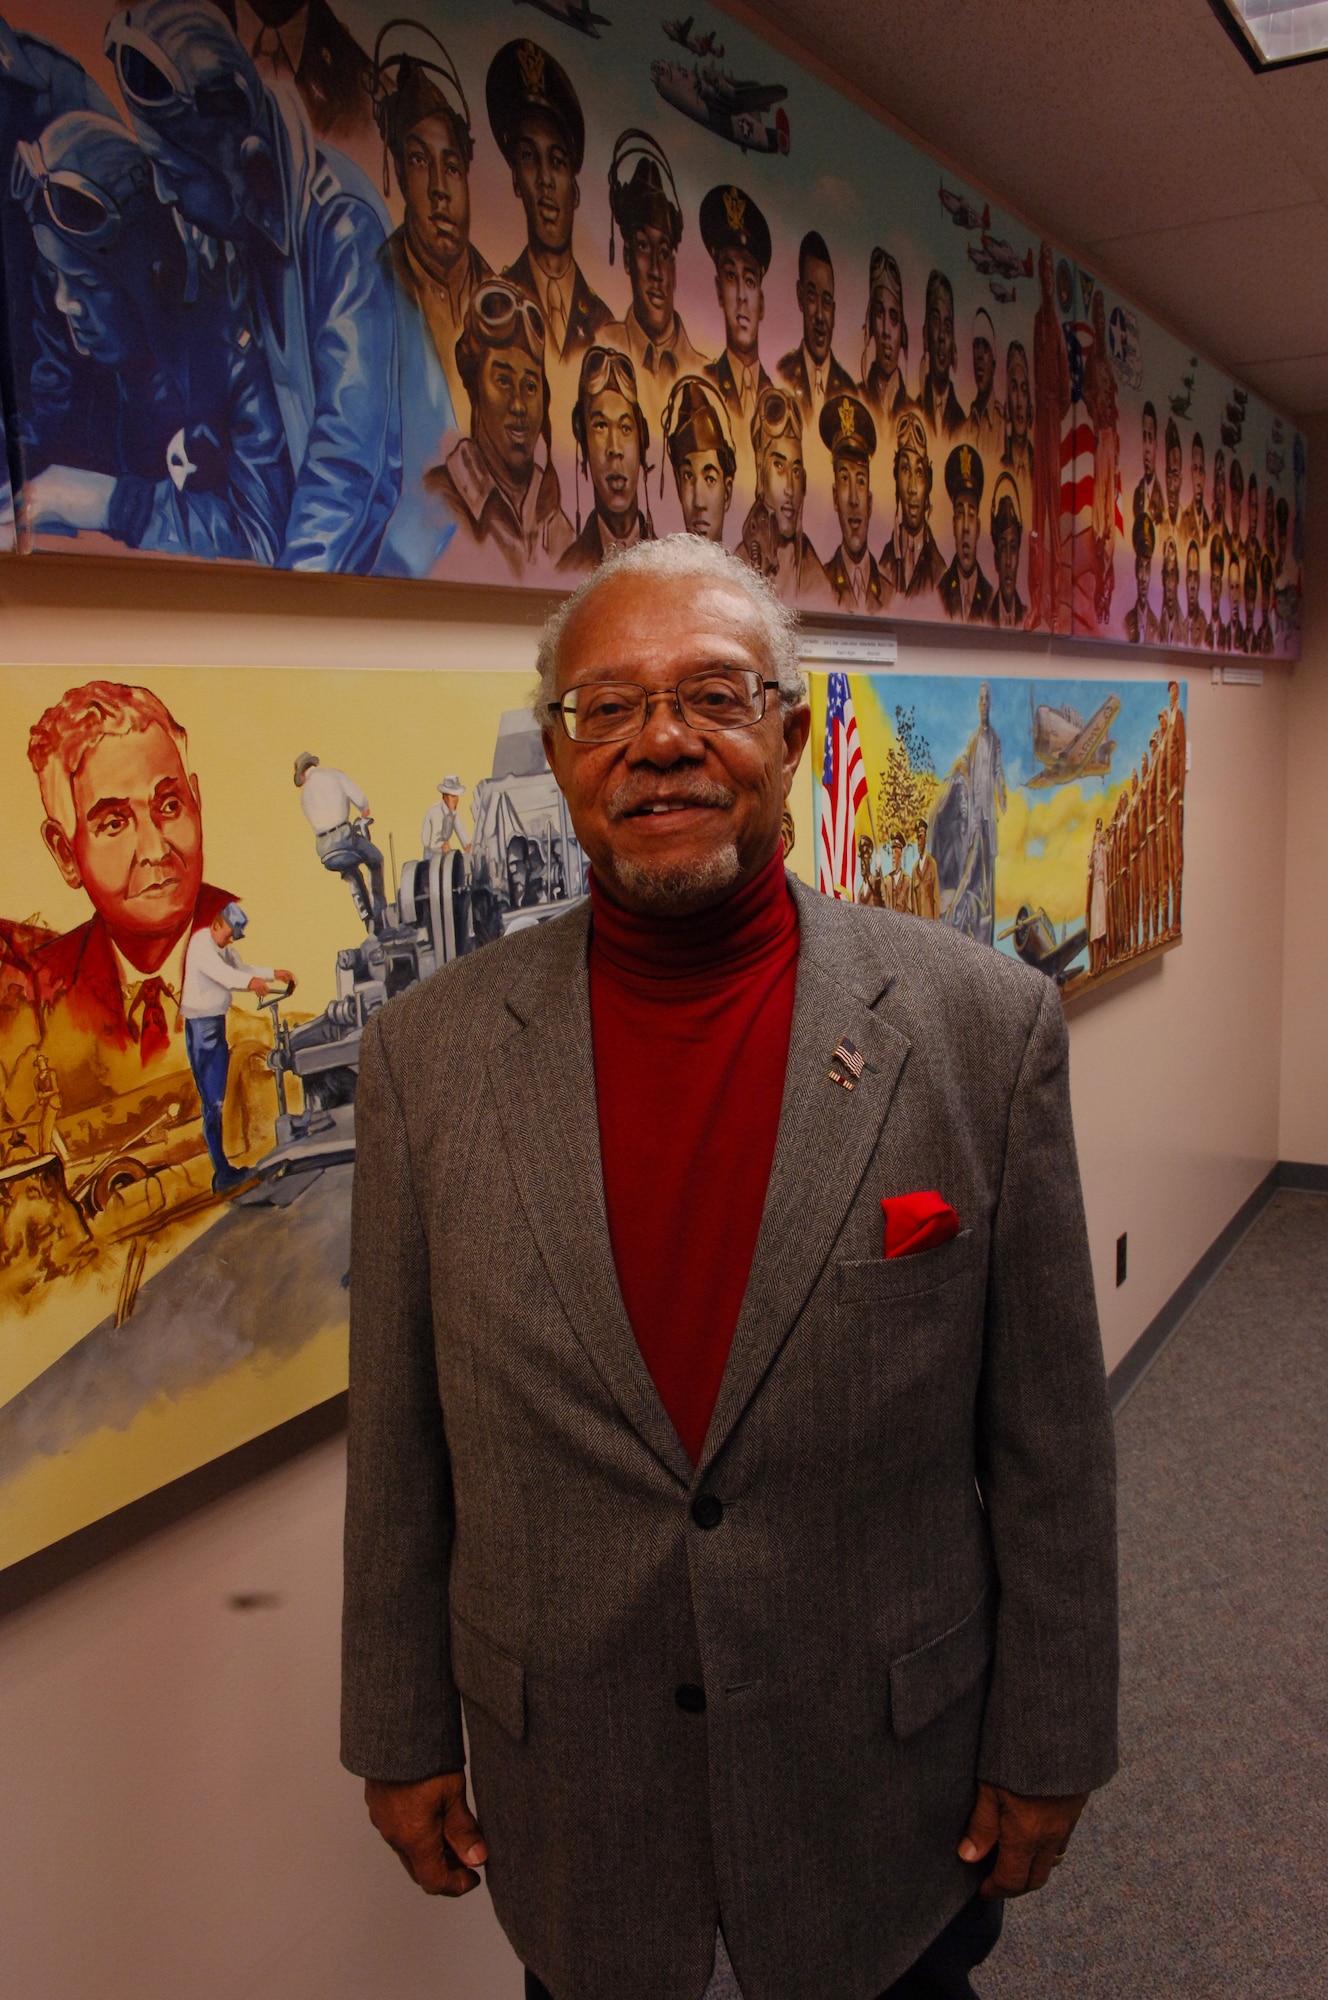 William Curtis, the painter of The Tuskegee Airman paintings, stands in front of his artwork at the base library at Scott Air Force Base, Ill. Jan, 13, 2012. Curtis started painting at the age of four. (U.S. Air Force photo/ Airman 1st Class Jake Eckhardt)